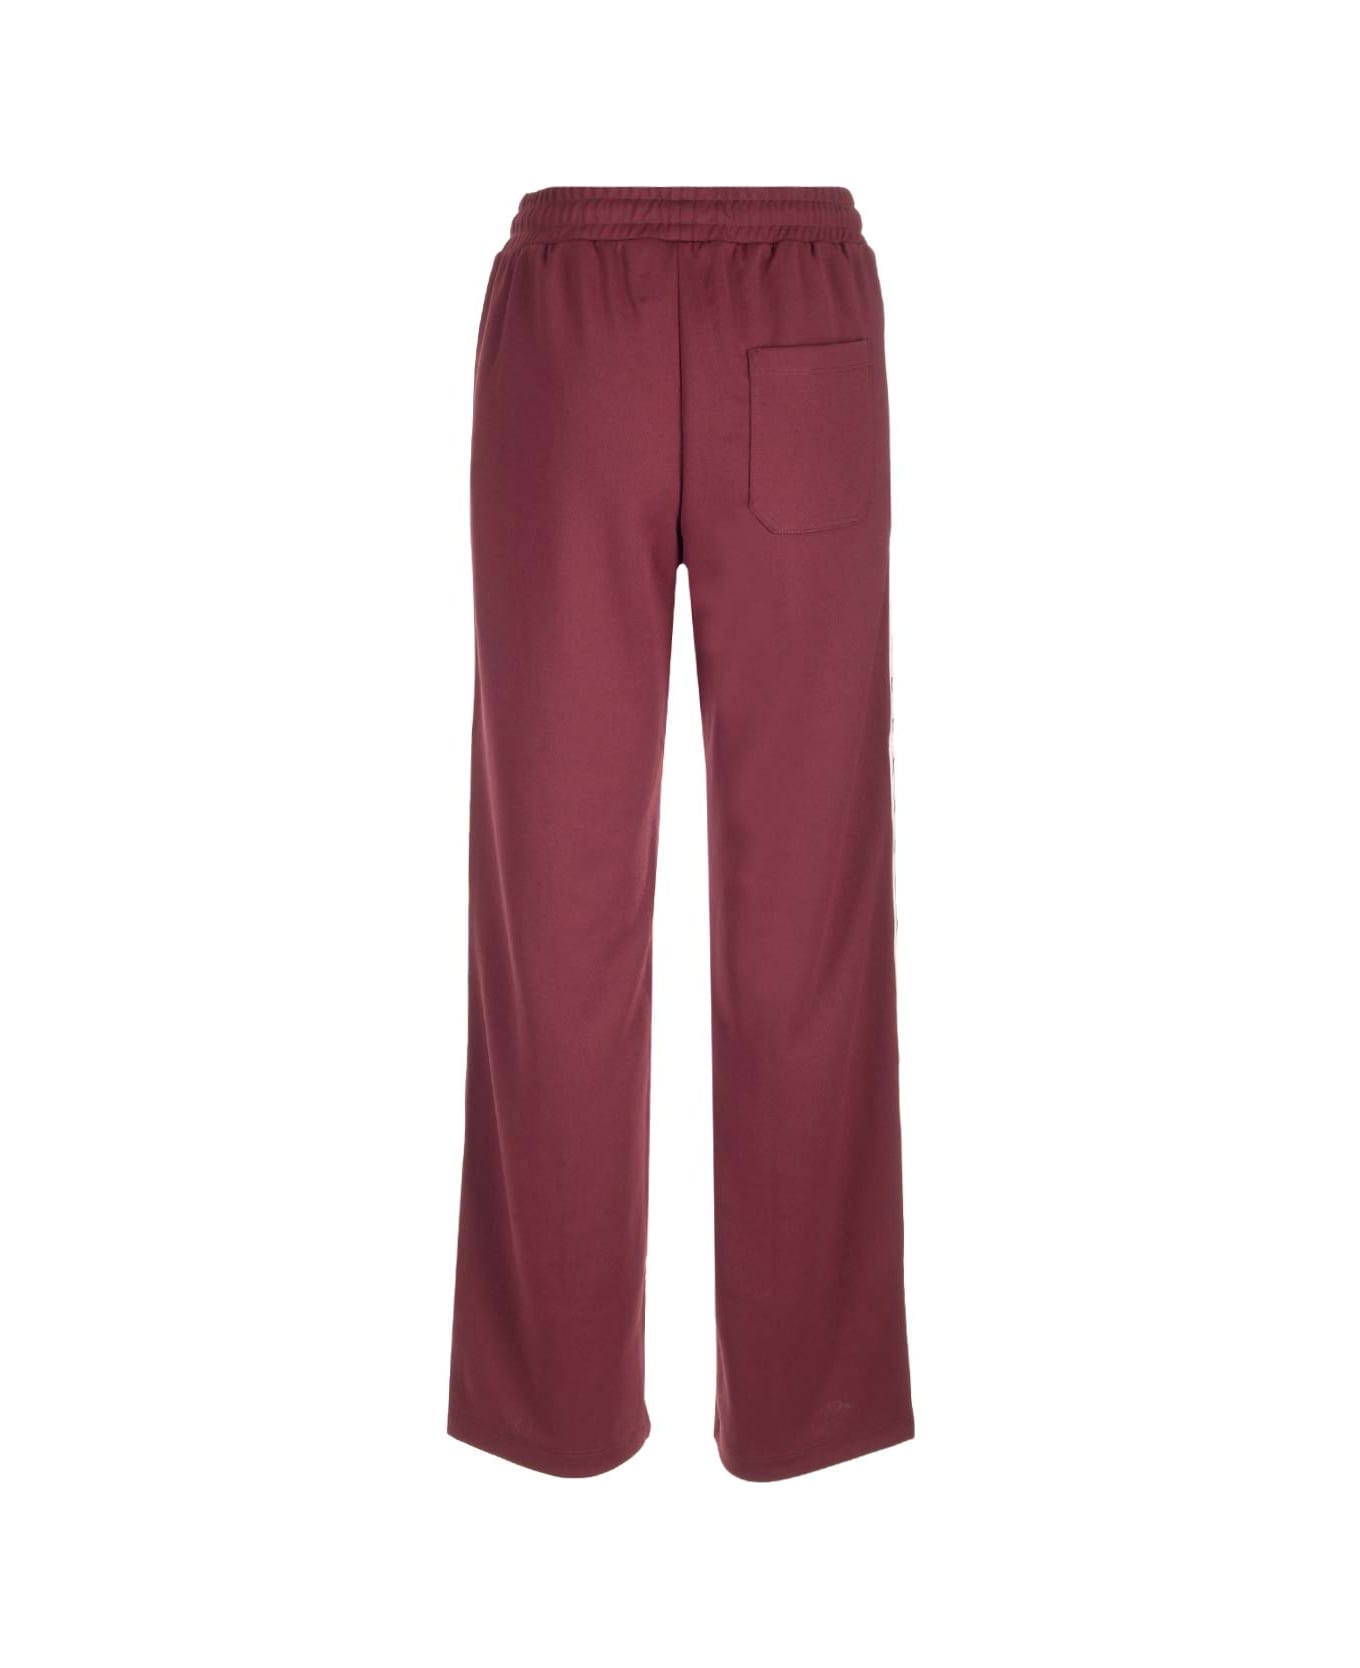 Golden Goose Burgundy Polyester Pants - Red ボトムス